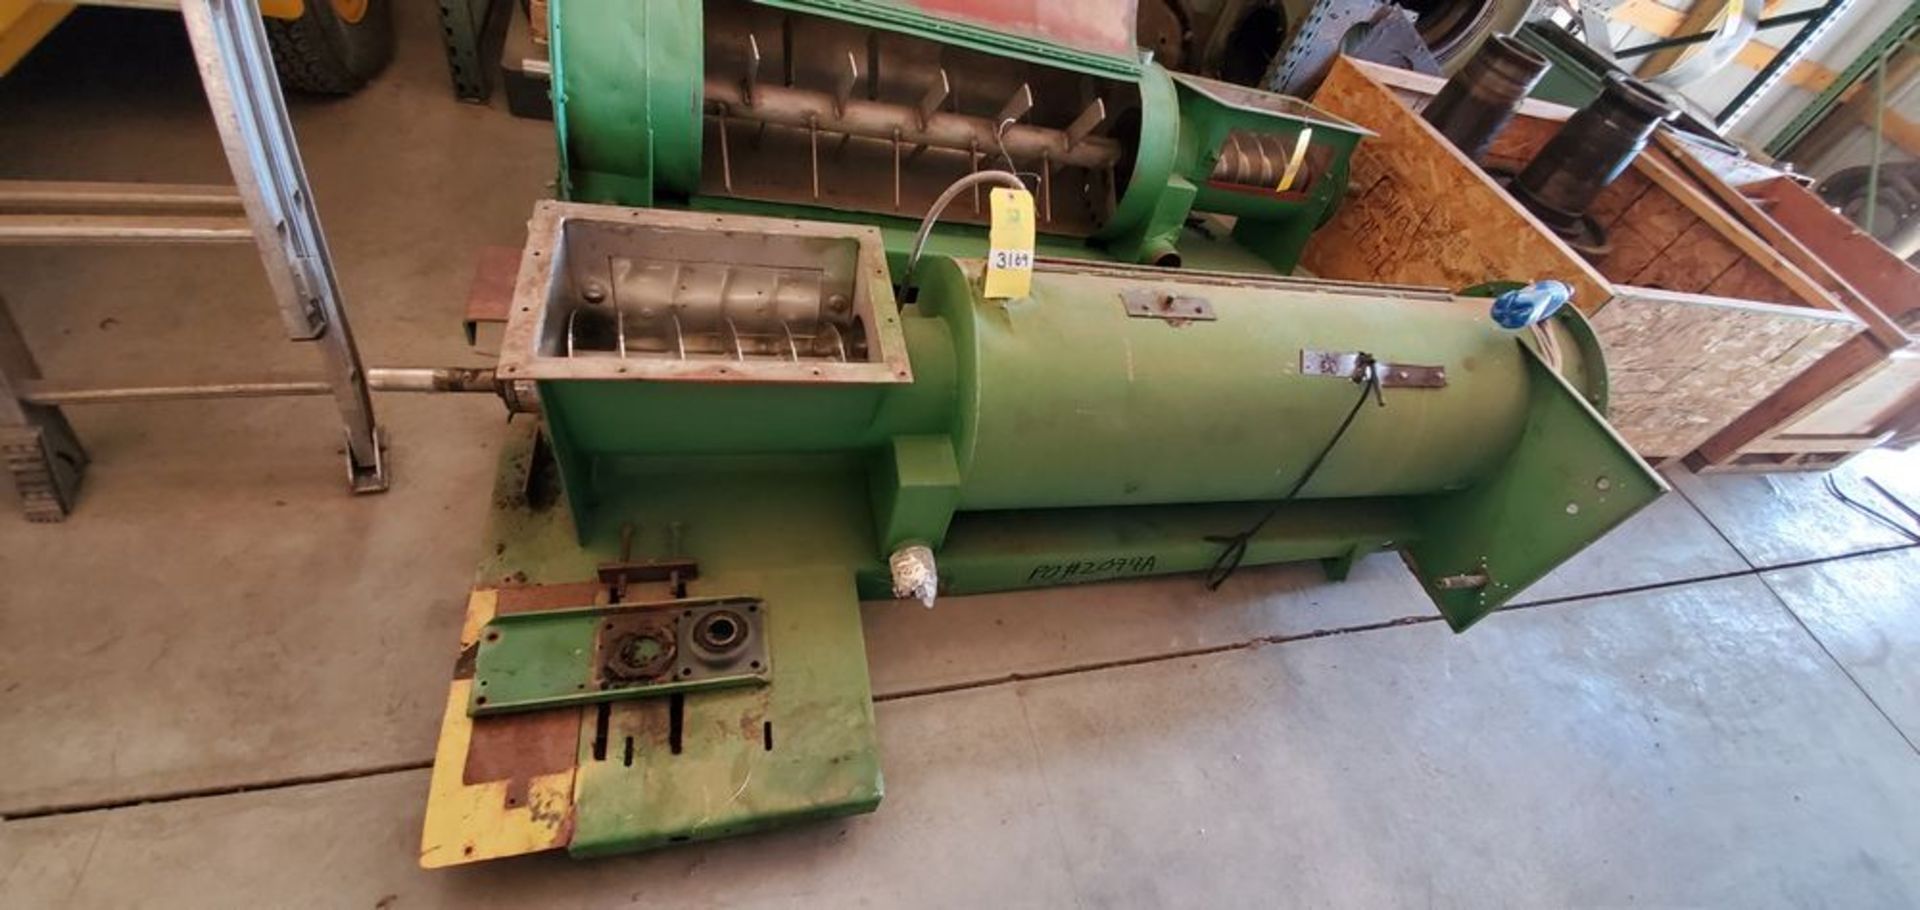 Located in Canon City, CO -- Sprout stainless feeder conditioner, no drive motor (approx new